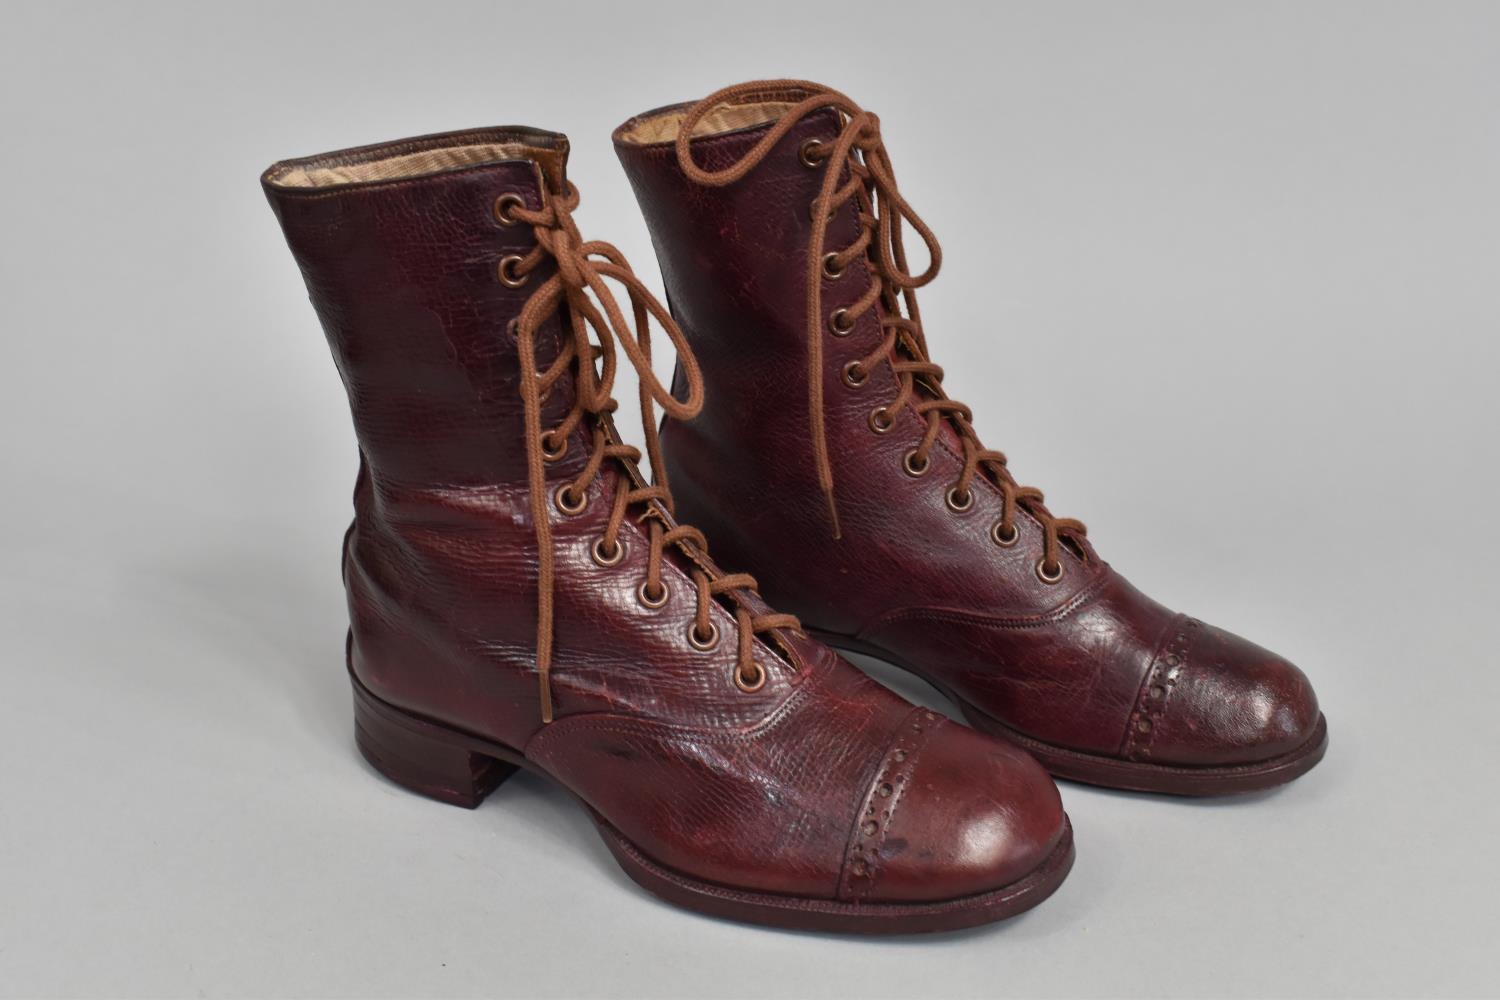 A Pair of Victorian Young Girl's Leather Boots, Size 11